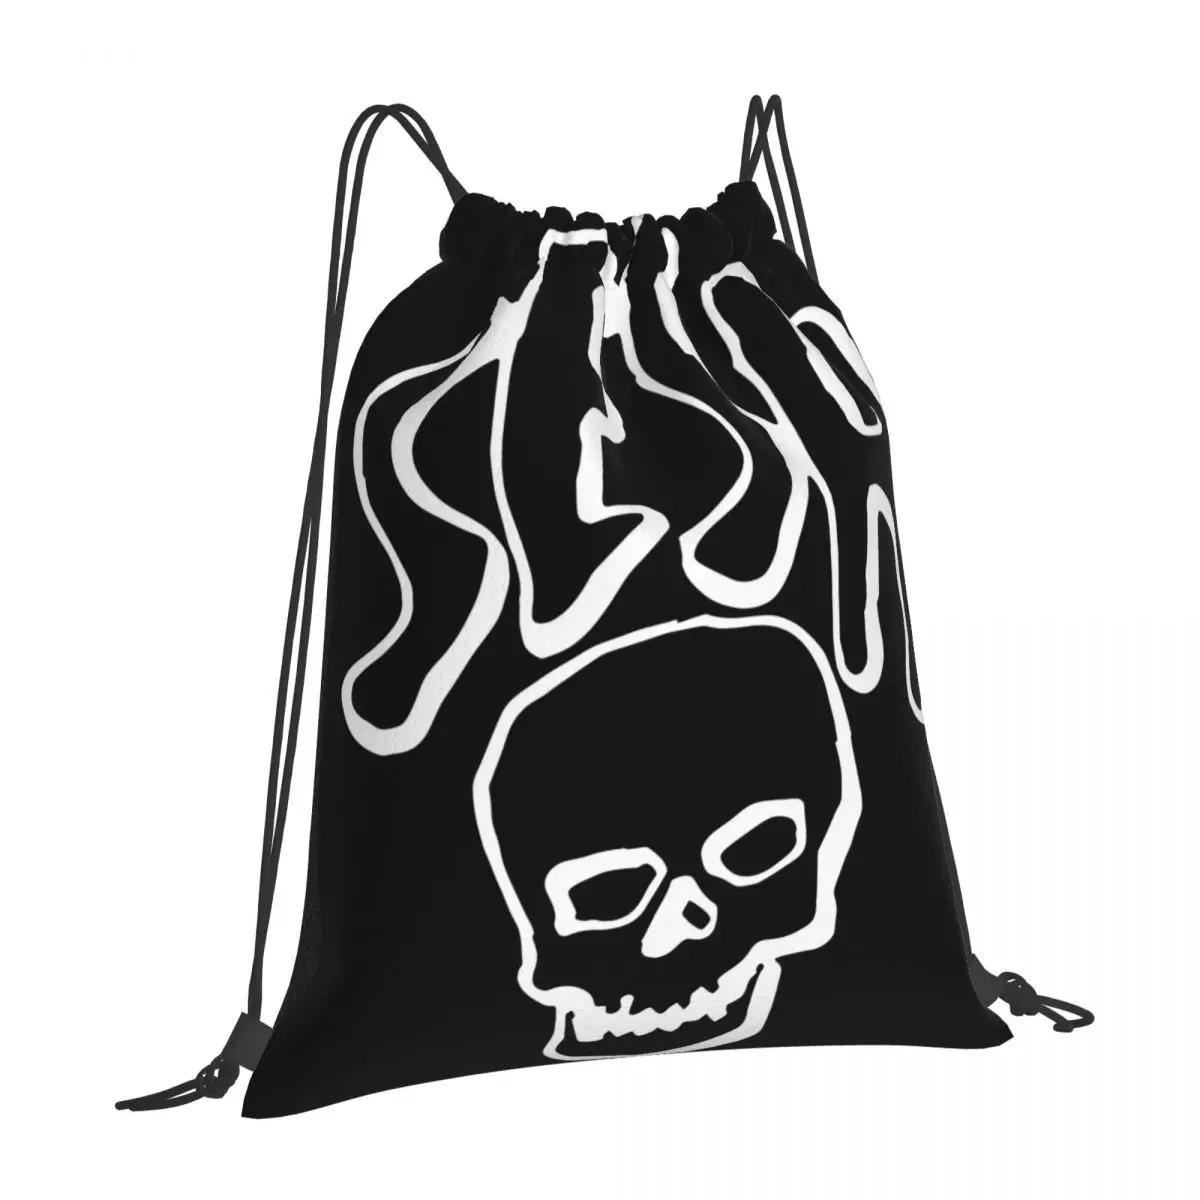 

Sesh Skull Sports-Themed Drawstring Bags Great Active Individuals Ideal School Camping Use Canvas